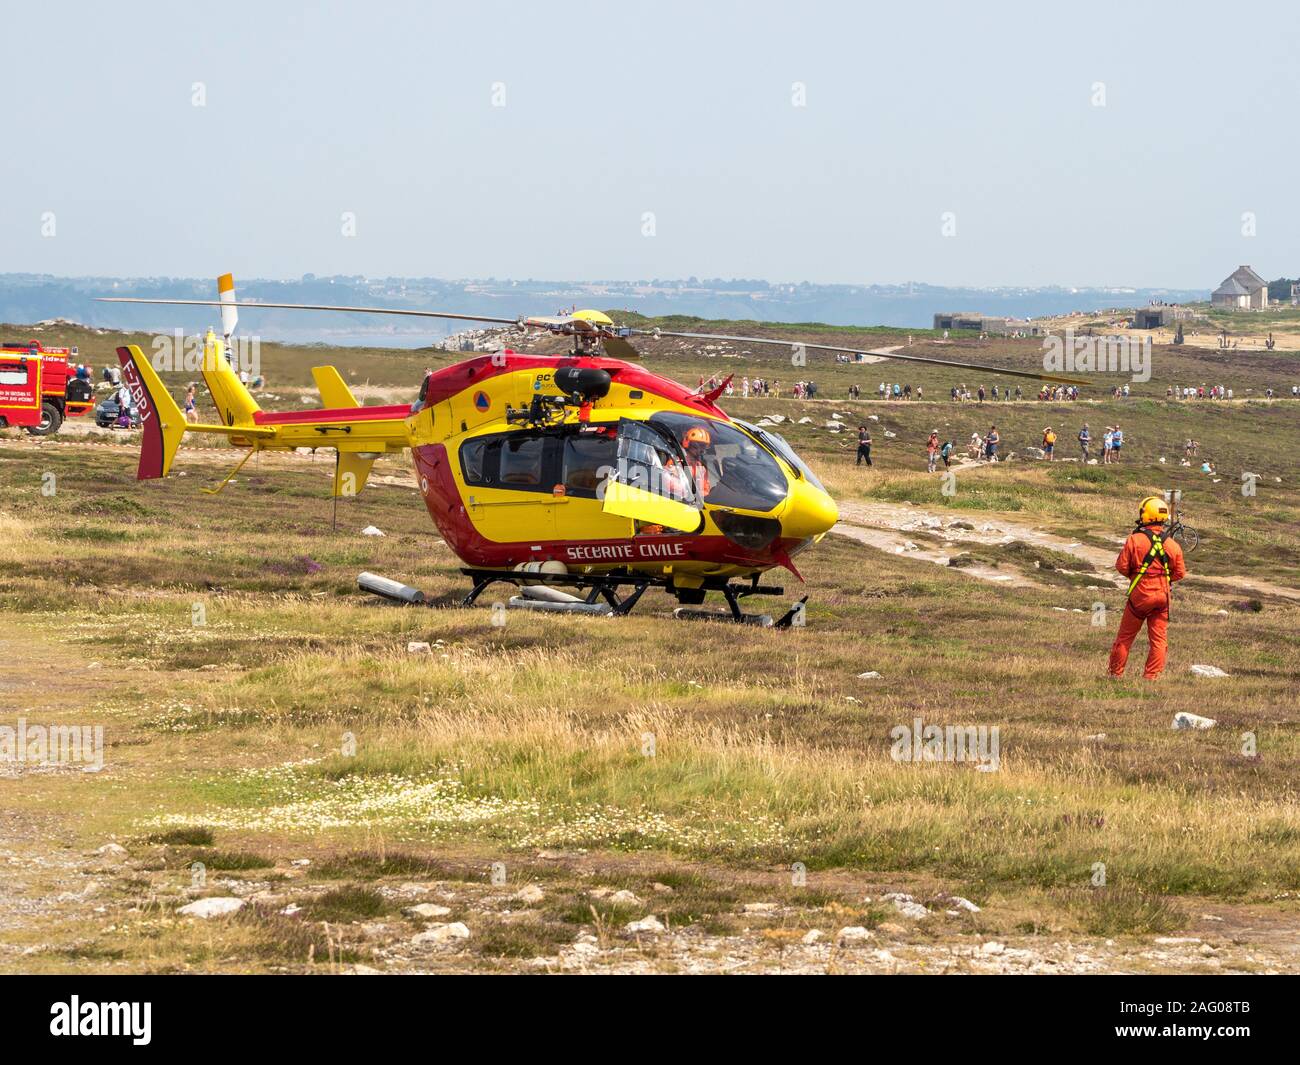 Civil security helicopter landed. One crew member in the cabin and the other standing in front of the aircraft. France Stock Photo